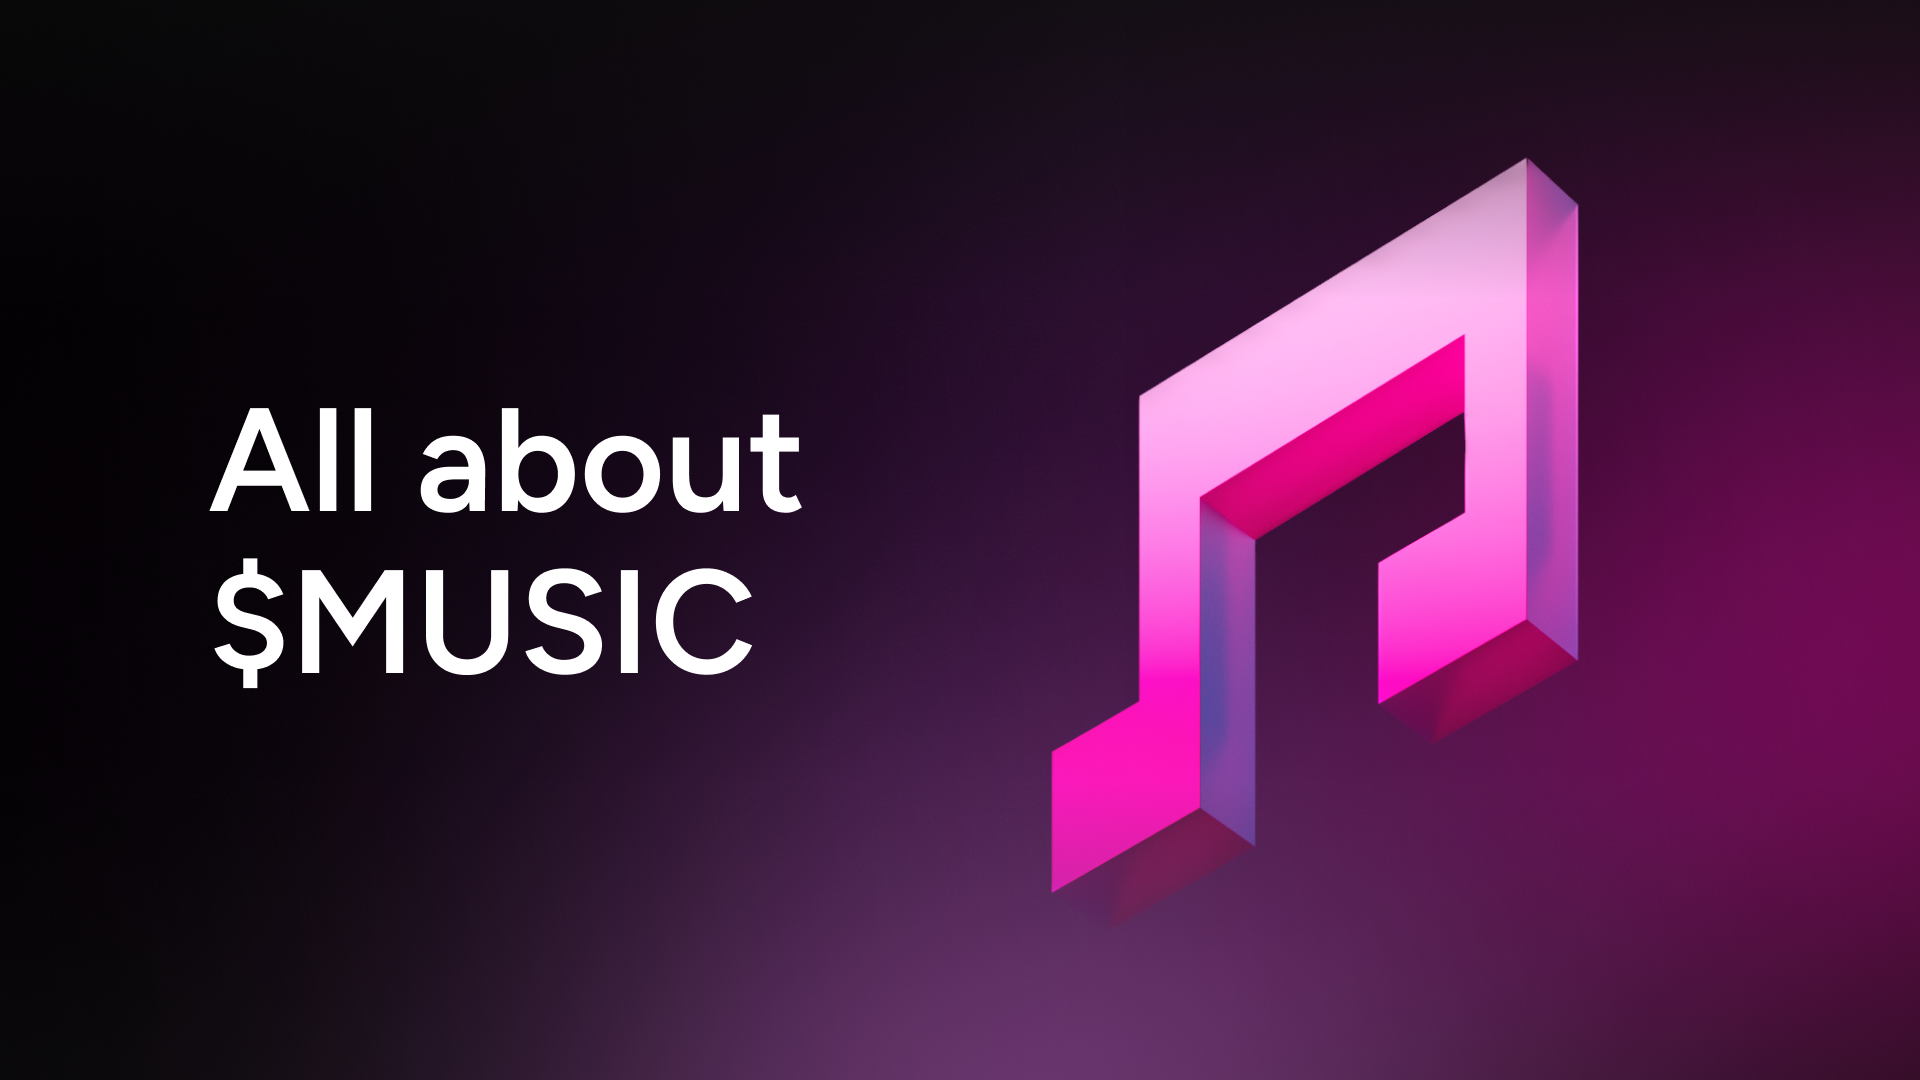 $MUSIC is the official token of the Gala Music web3 ecosystem, powering ownership and rewards.